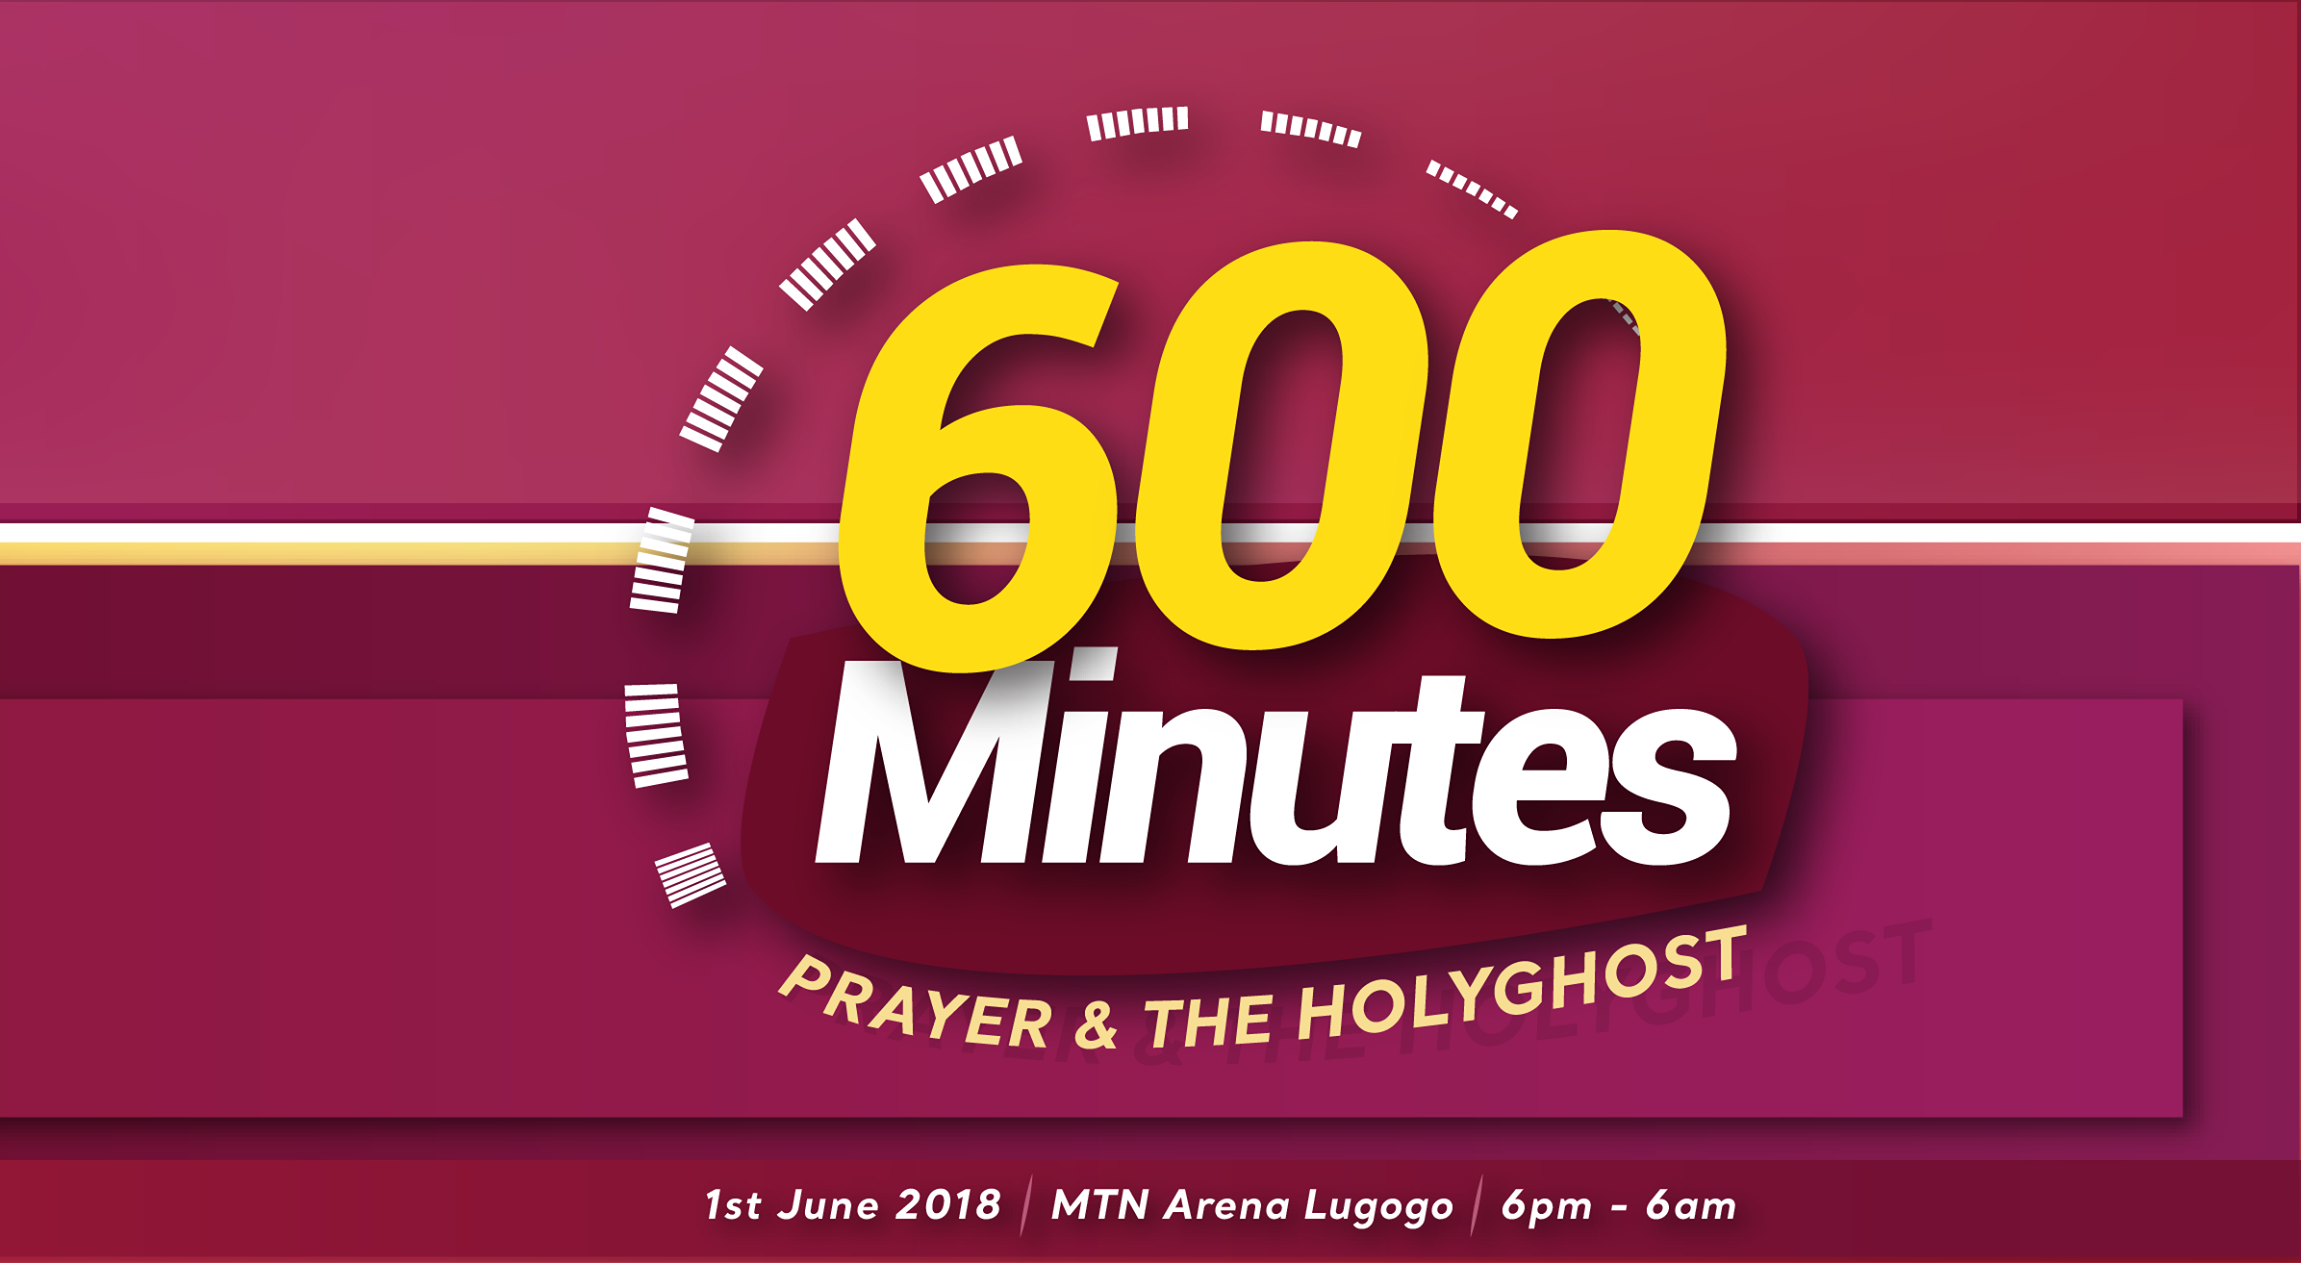 Christ Heart Ministries Set to Hold 600 Minutes in Prayer